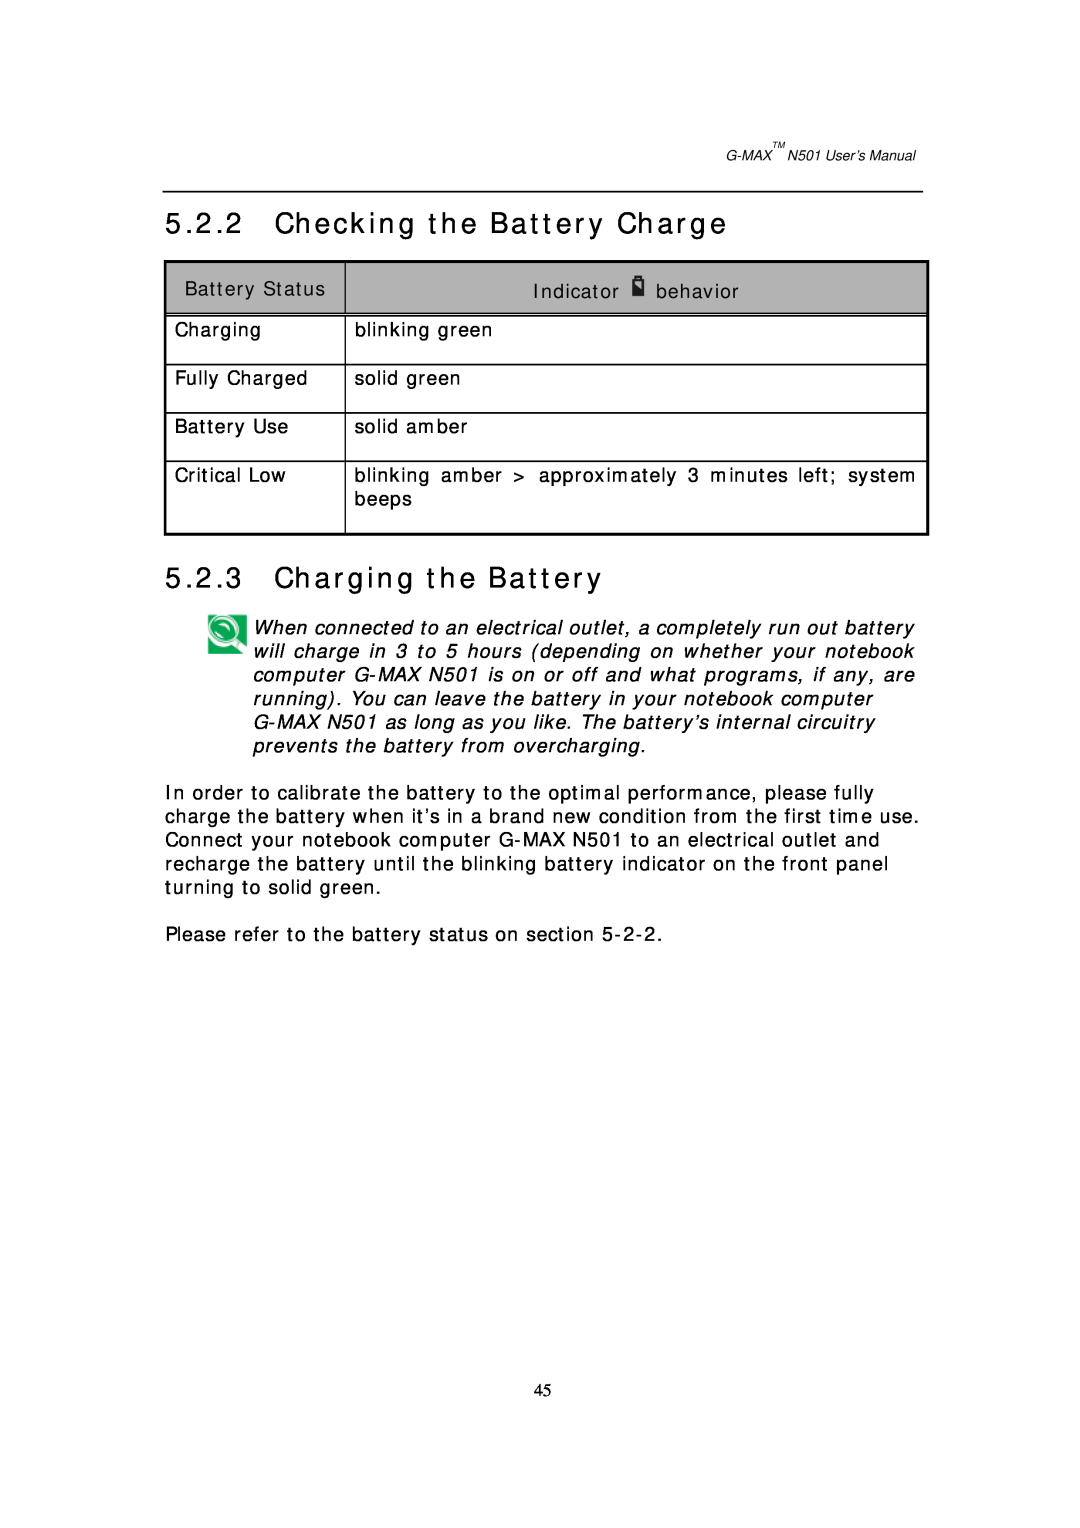 Gigabyte G-MAX N501 user manual Checking the Battery Charge, Charging the Battery 